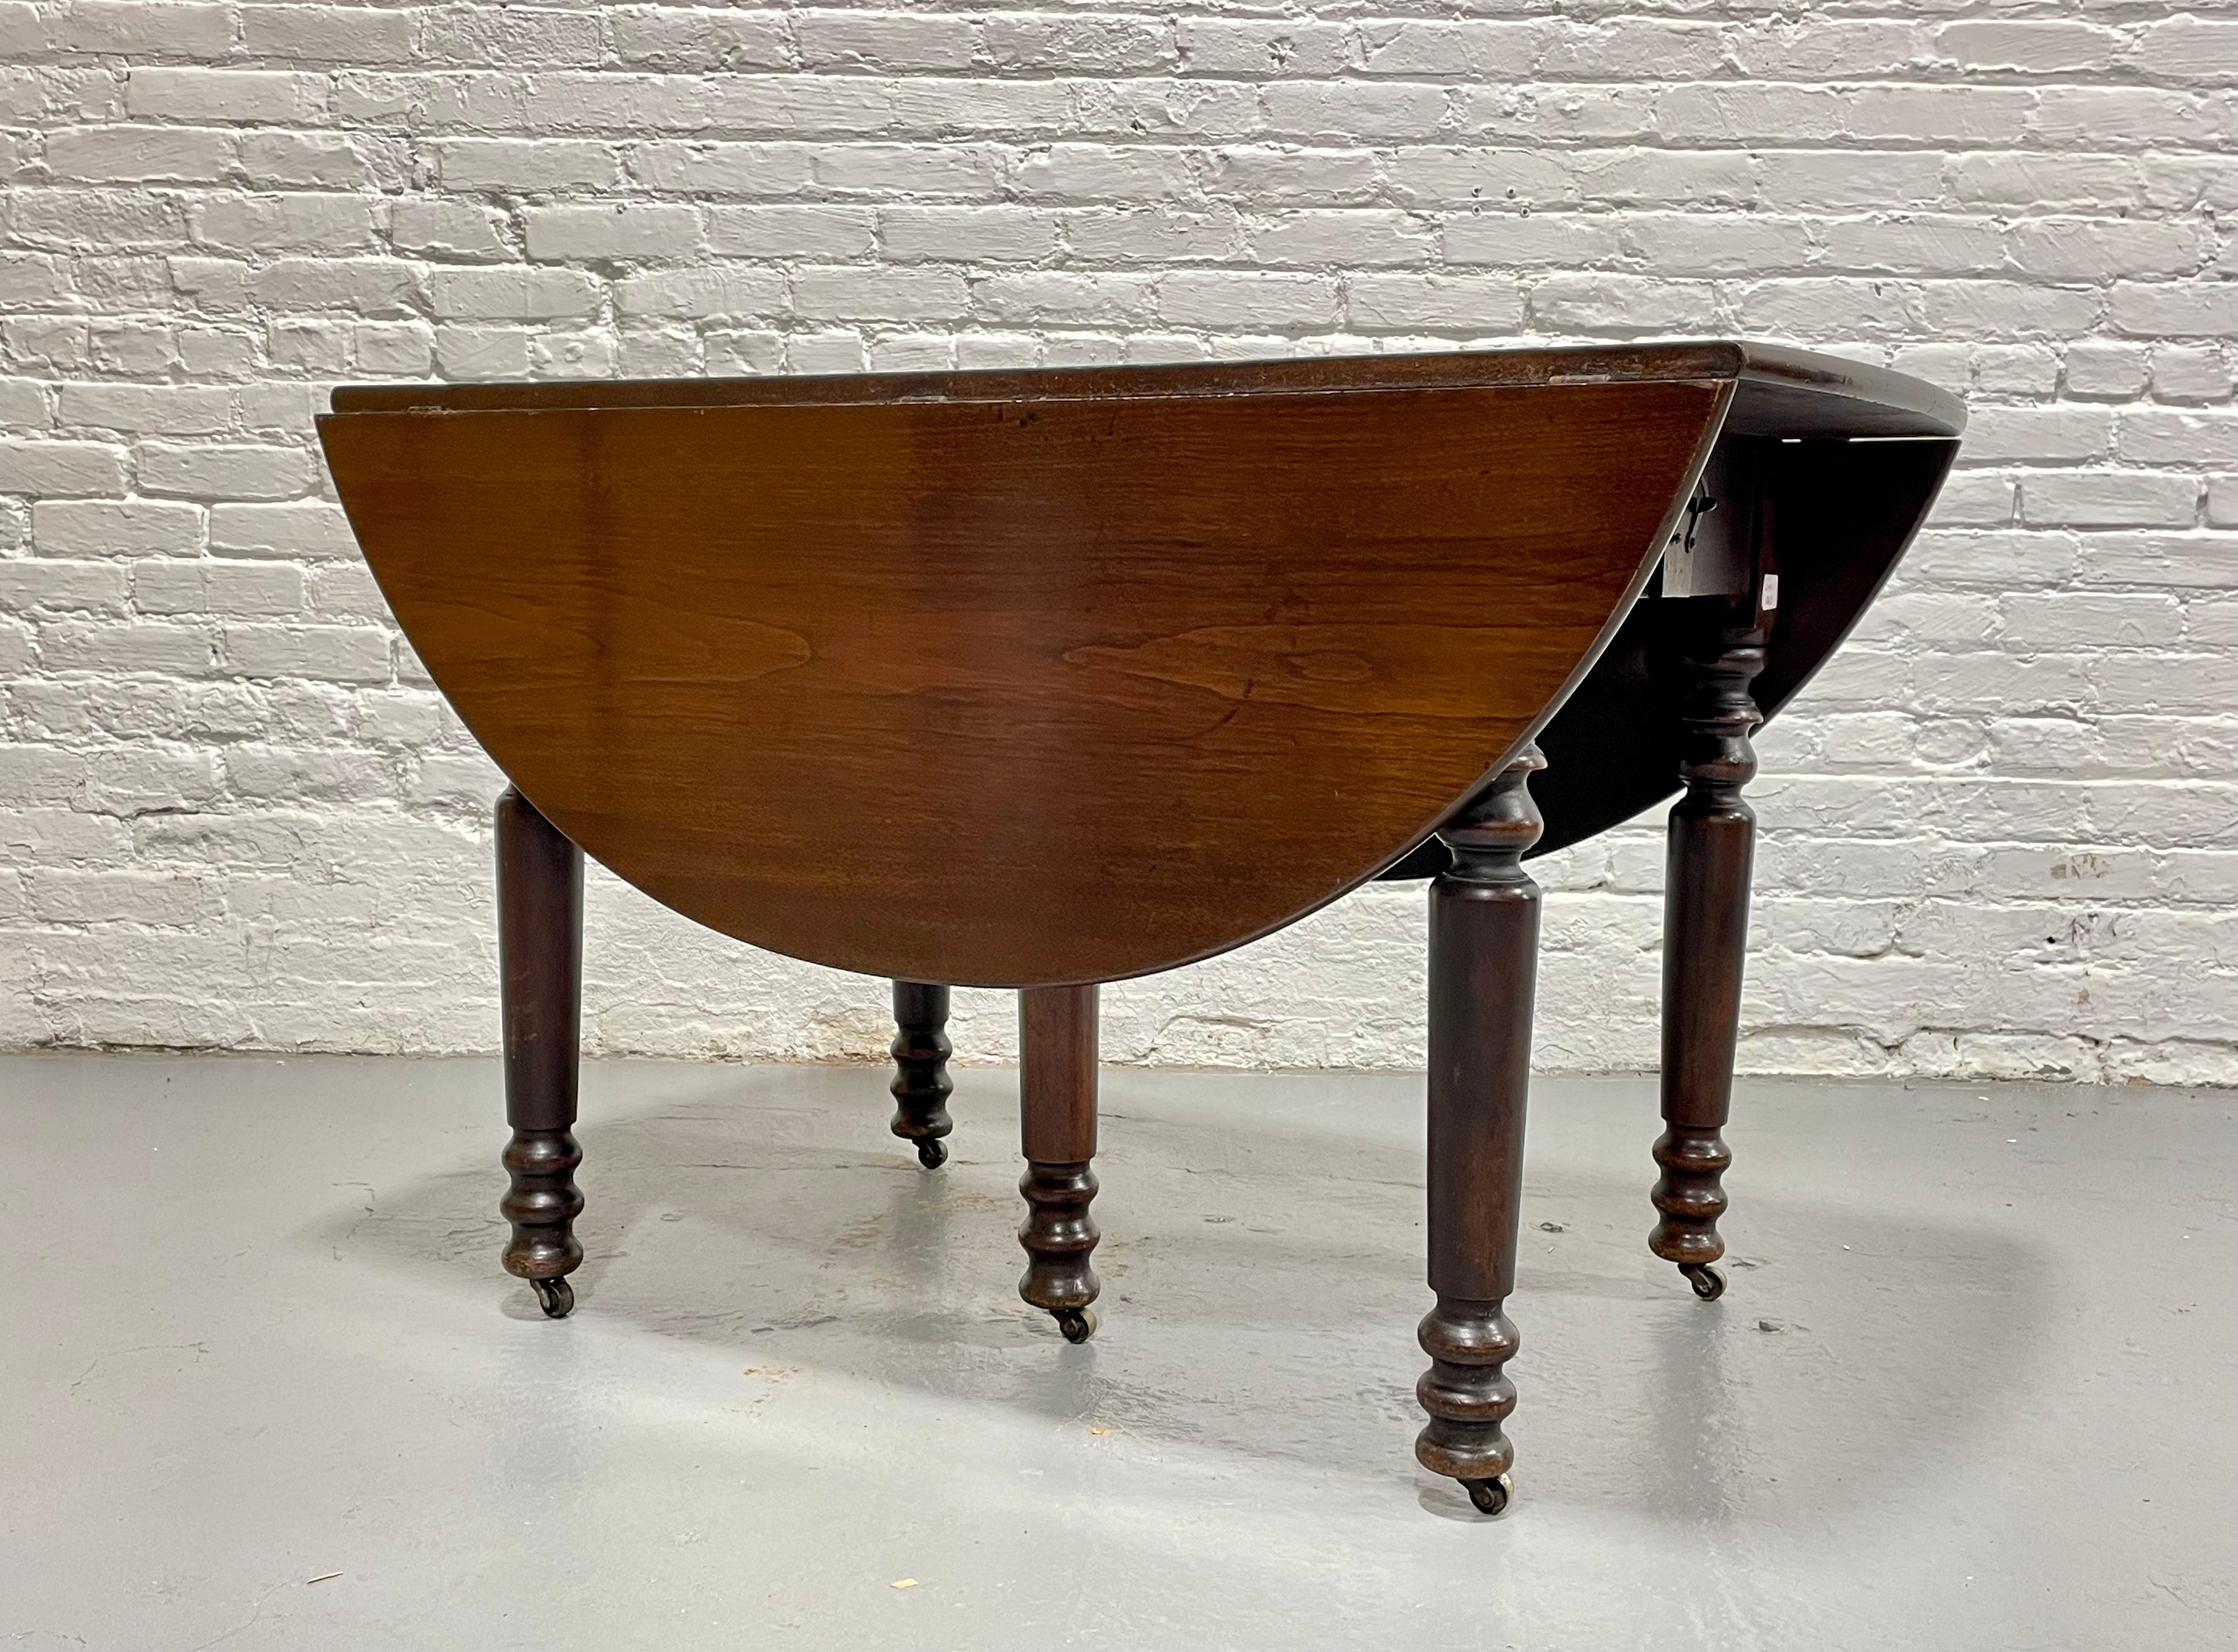 The most perfect apartment size Antique Drop Leaf Oval Extendable Dining Table, c. 1910. This incredible piece transforms from a small two person dining table to seat as many as 8-10 guests. The table features two drop leaves that flip open to